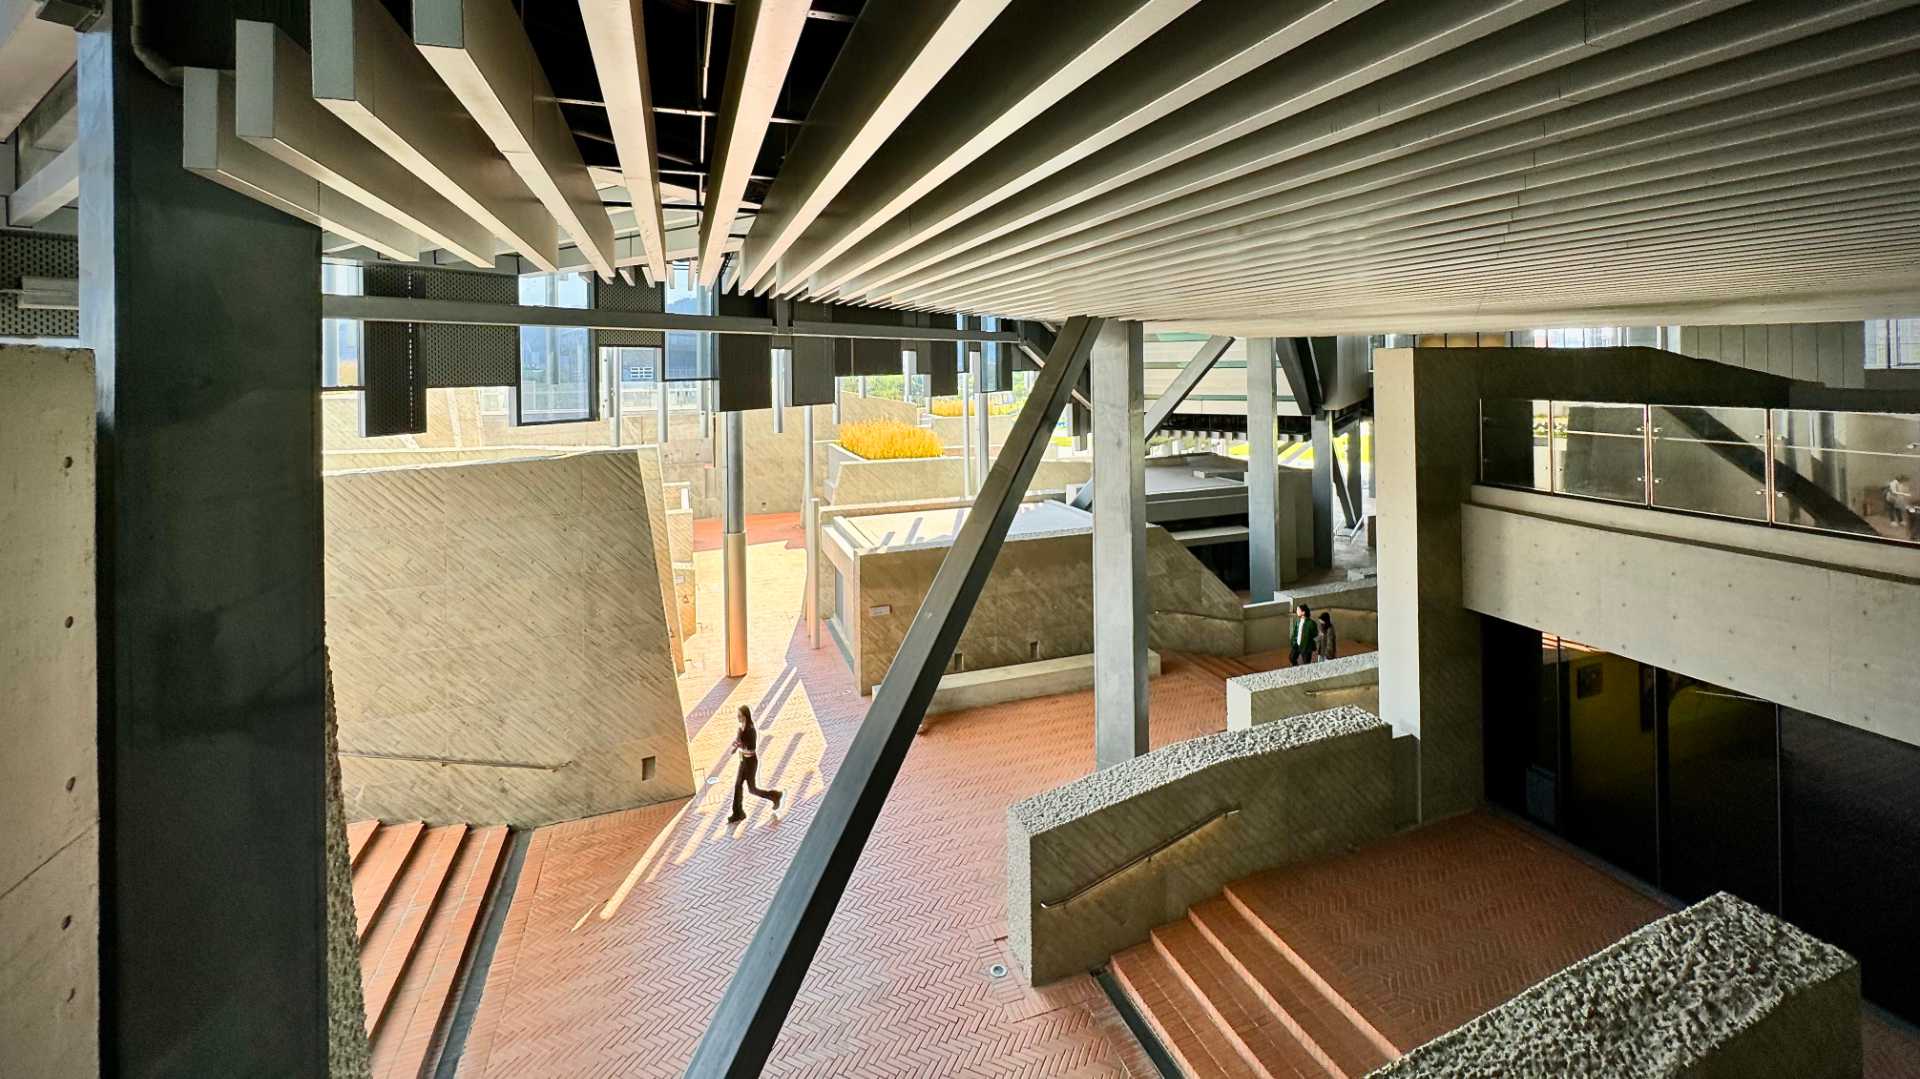 A double-height space beneath a building, open to the outdoors, comprising multiple levels of tiled spaces with low concrete walls.